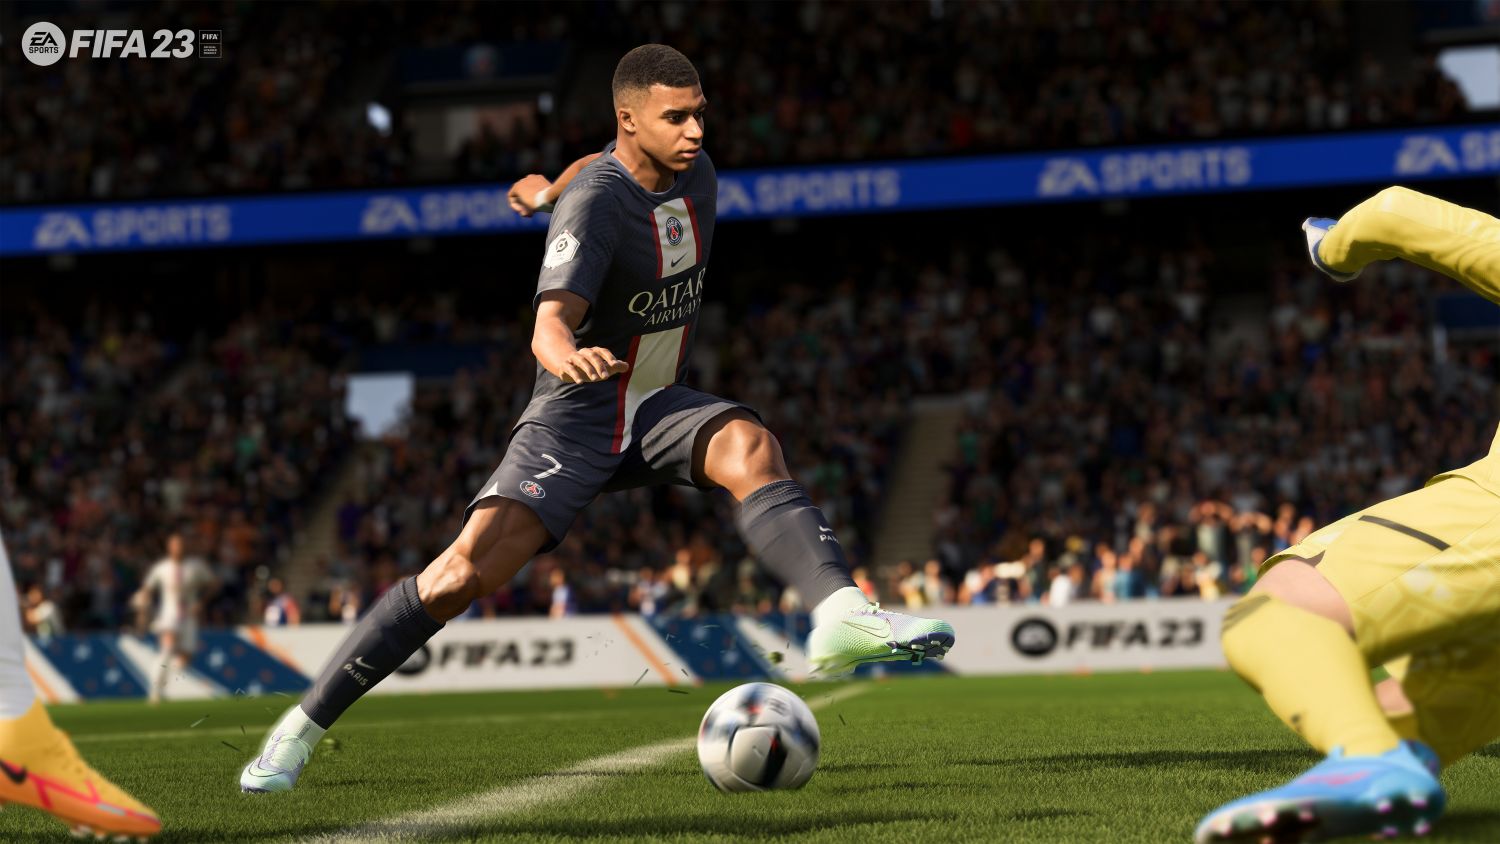 FIFA 23 gameplay - Mbappe